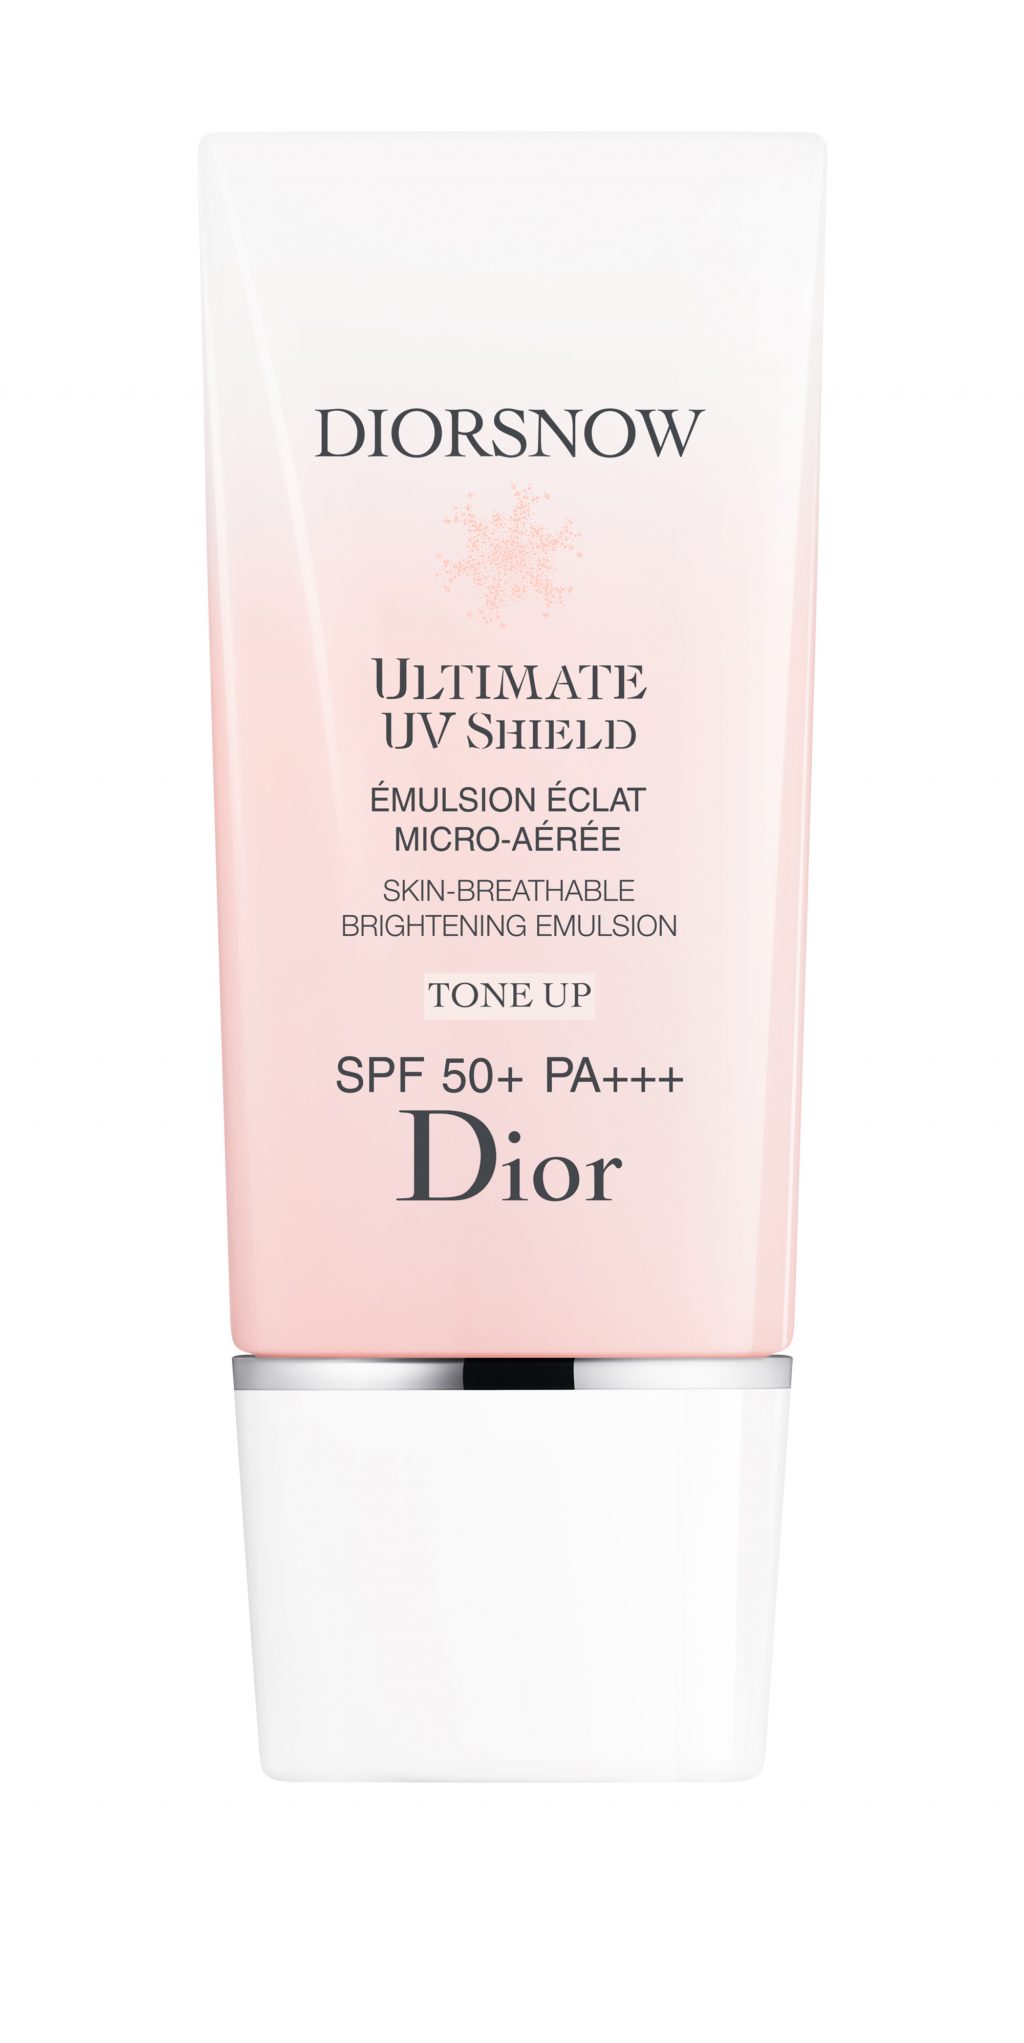 kem chống nắng Dior Snow Ultimate